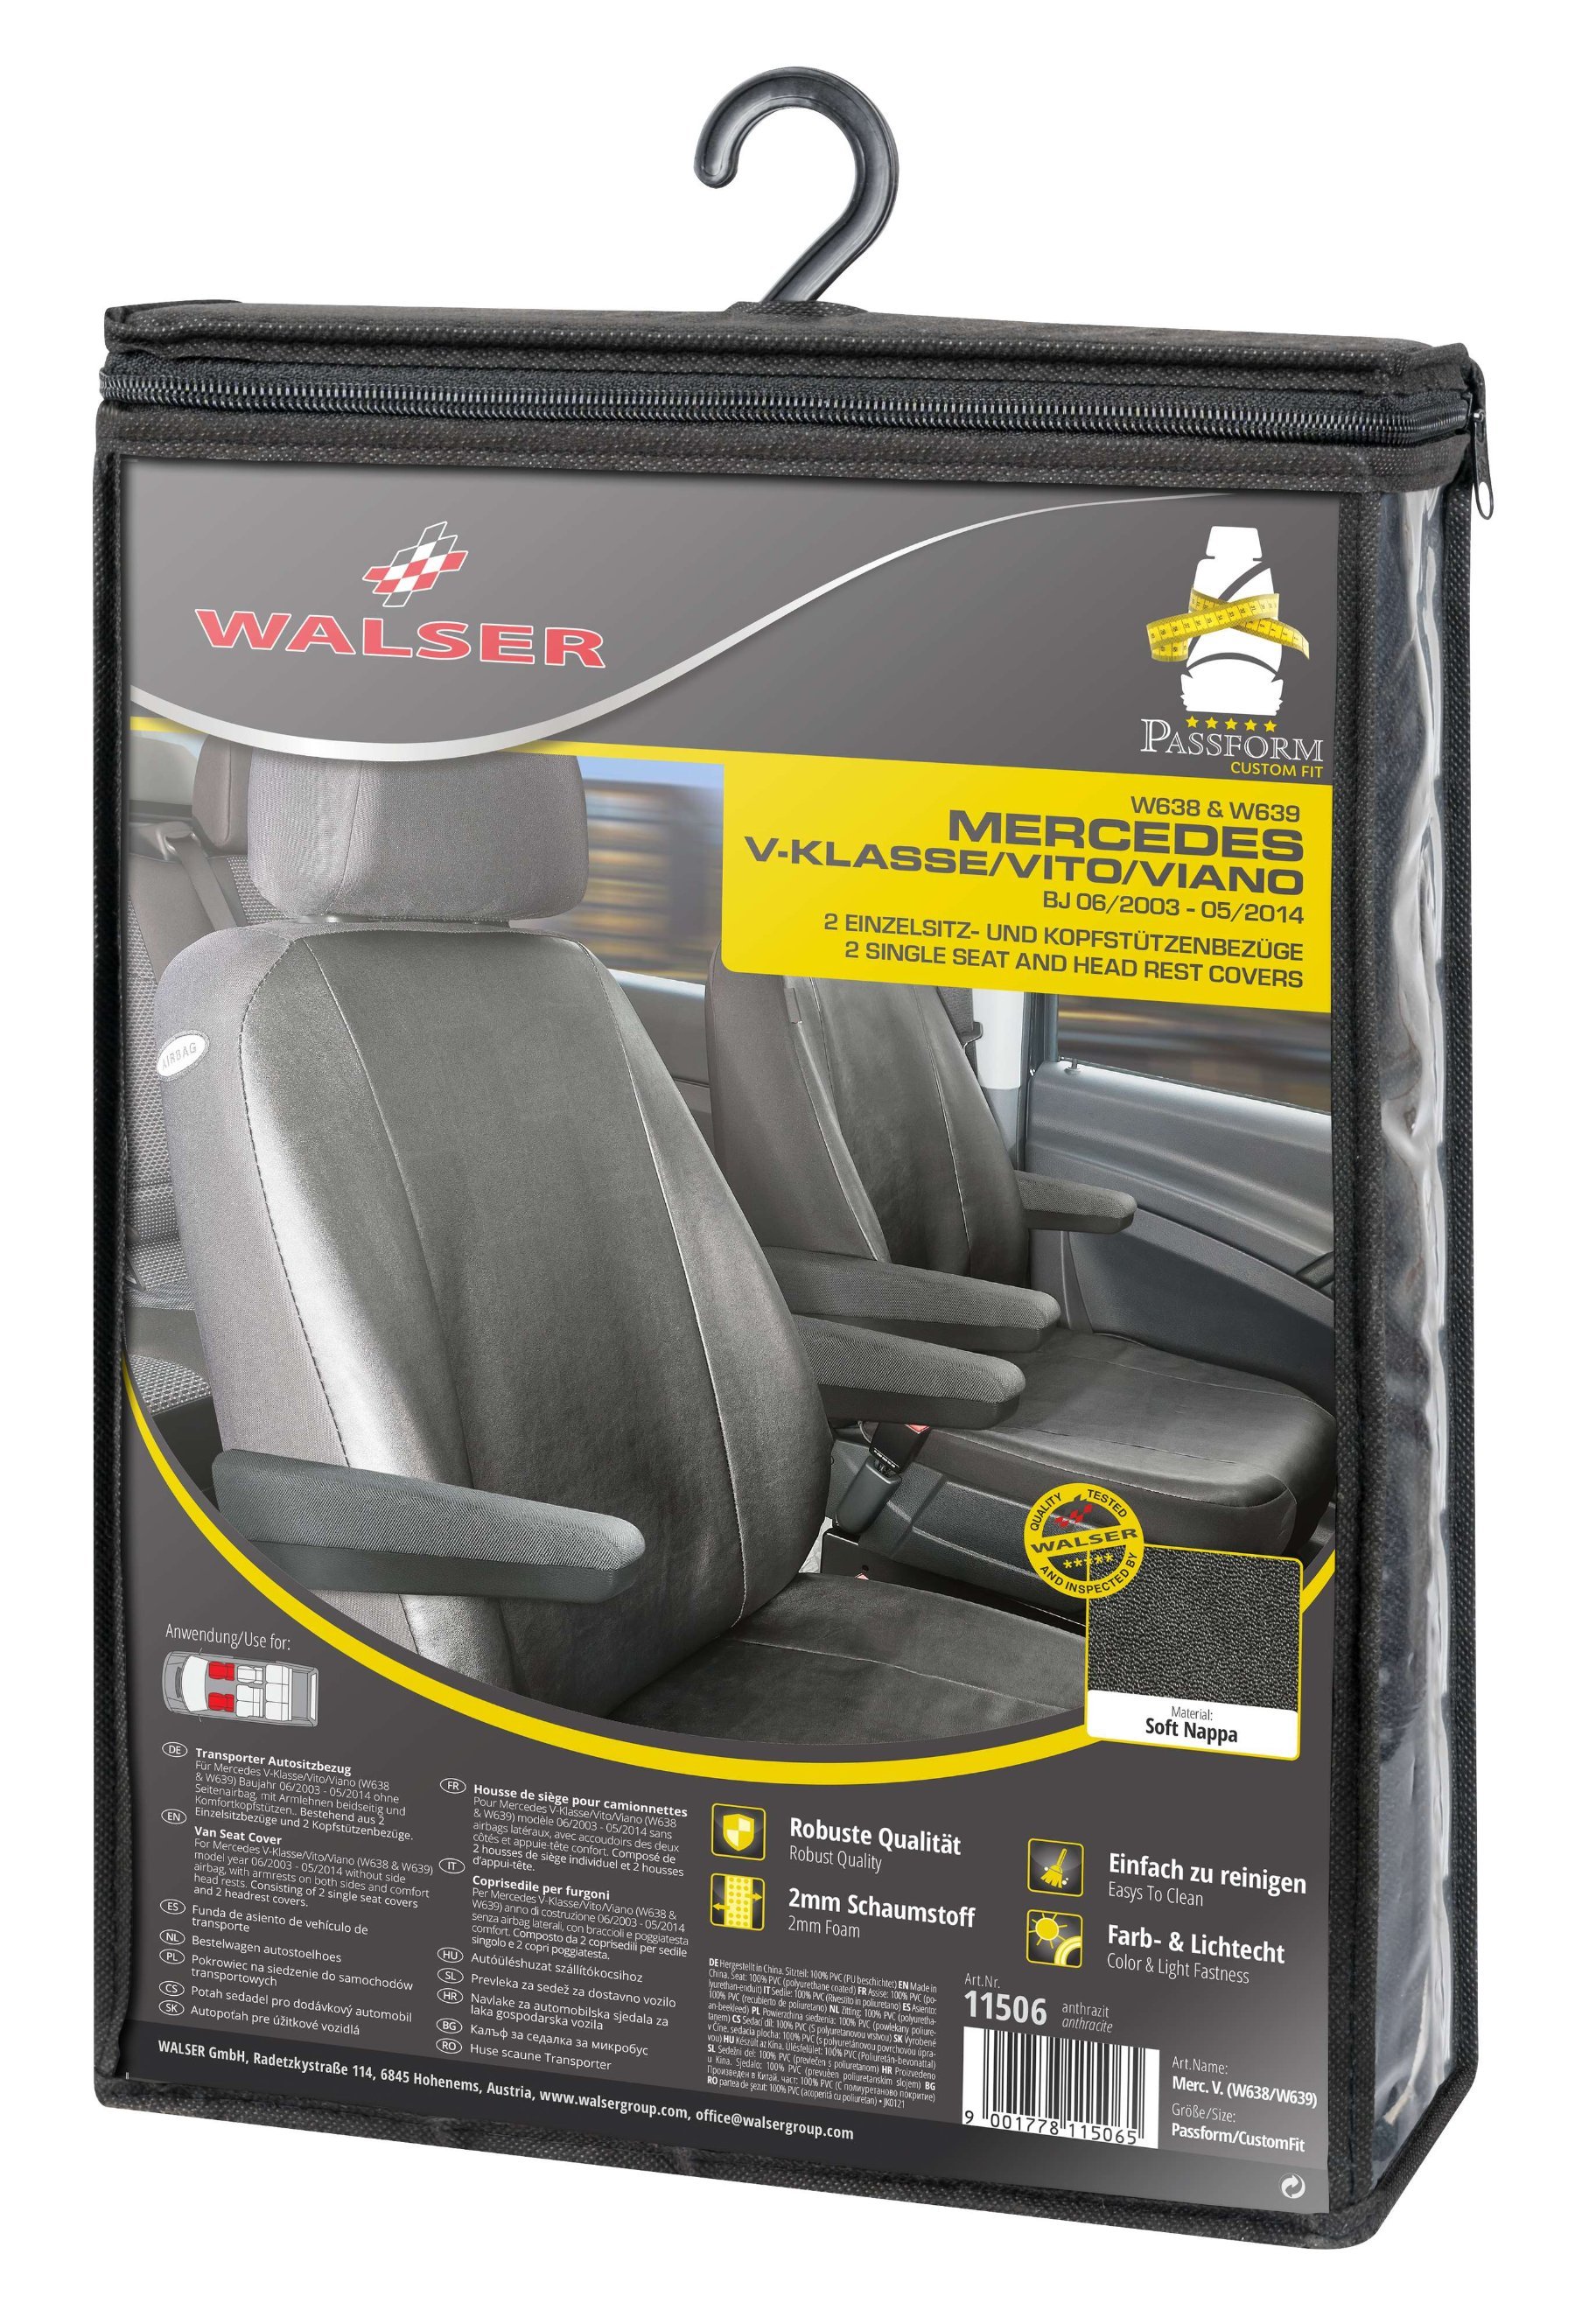 Car Seat cover Transporter made of imitation leather for Mercedes-Benz Viano/Vito, 2 single seats with armrest inside & outside